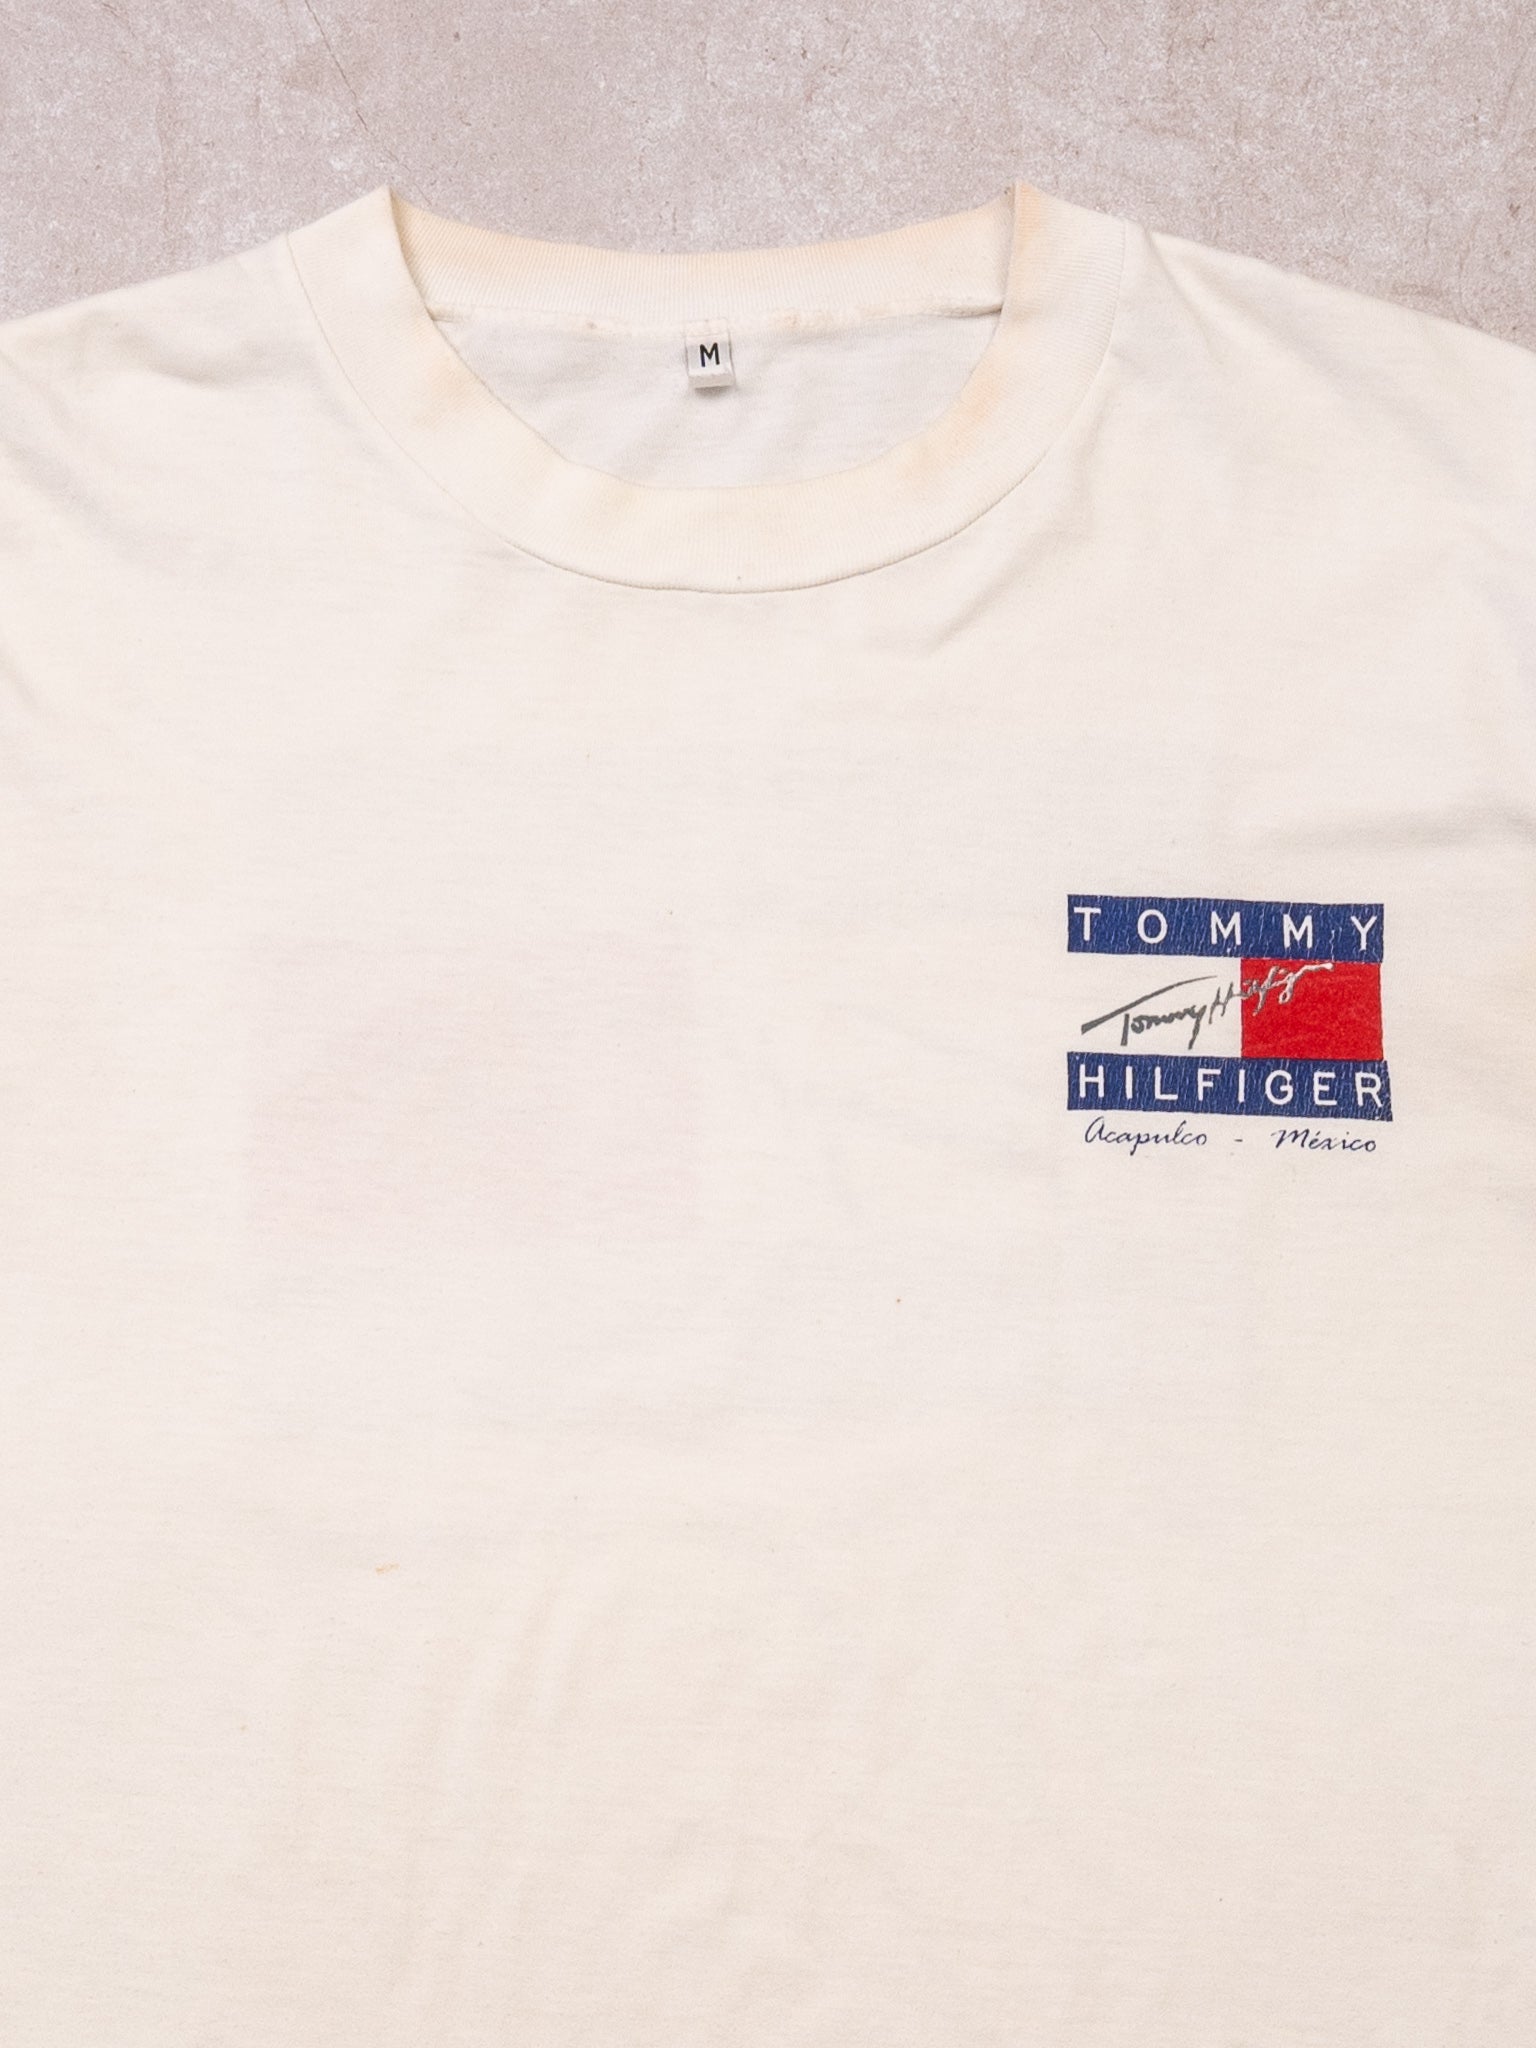 Vintage 90s Rugged Tommy Acapulco Mexico Tee (M)